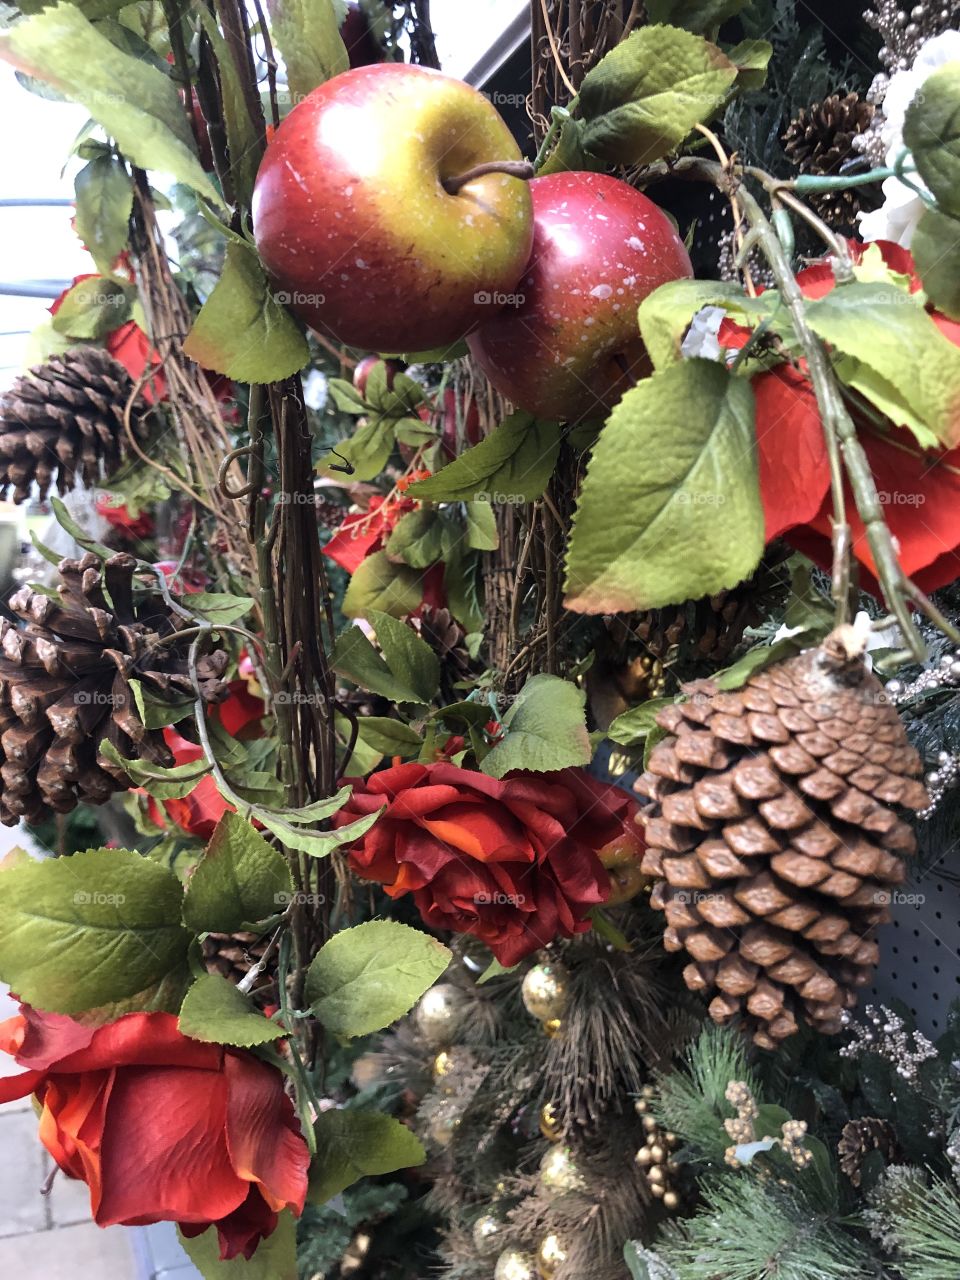 Another Christmas decoration which l think is enhanced with the addition of the roses red apples.